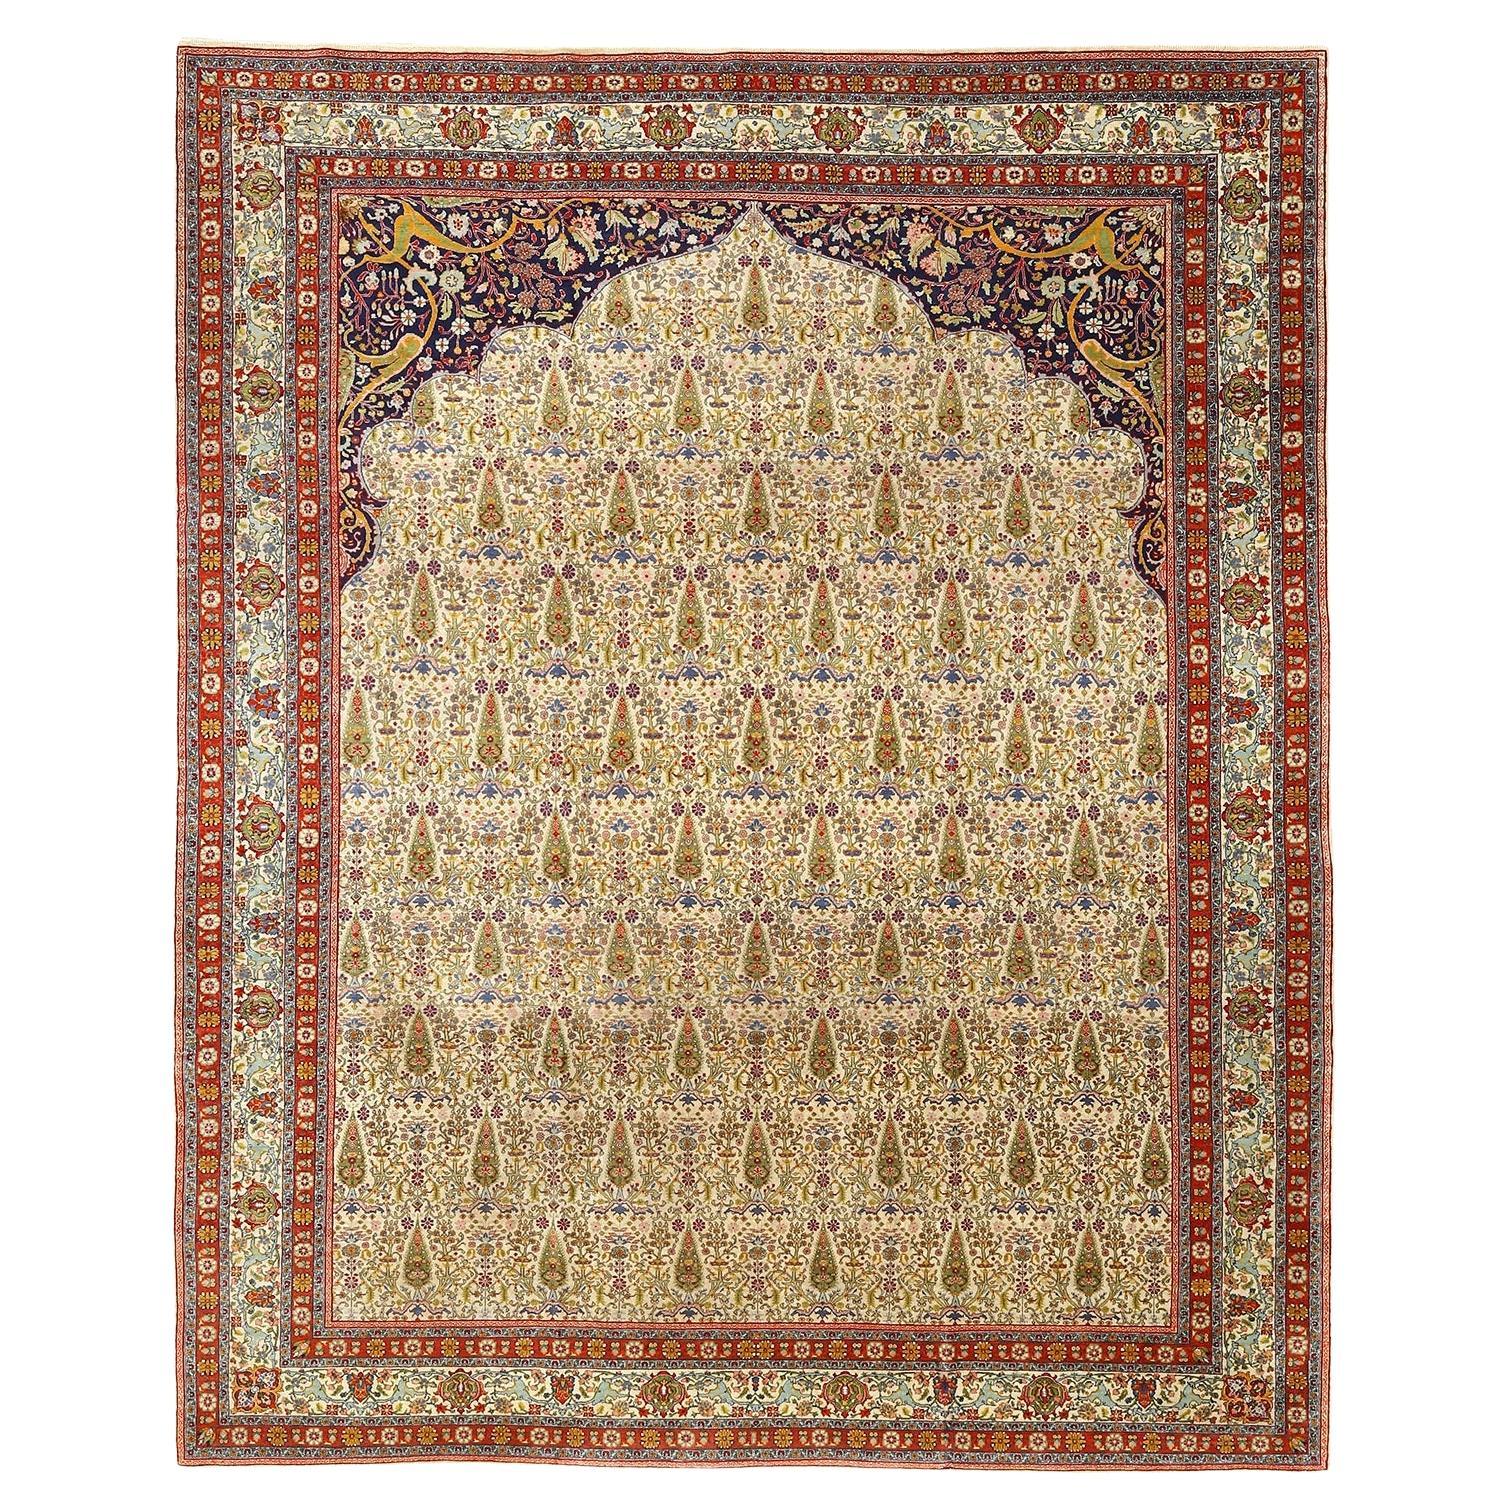 Damoka Collection Antique Persian Tabriz - Size: 9 ft 10 in x 8 ft 1 in